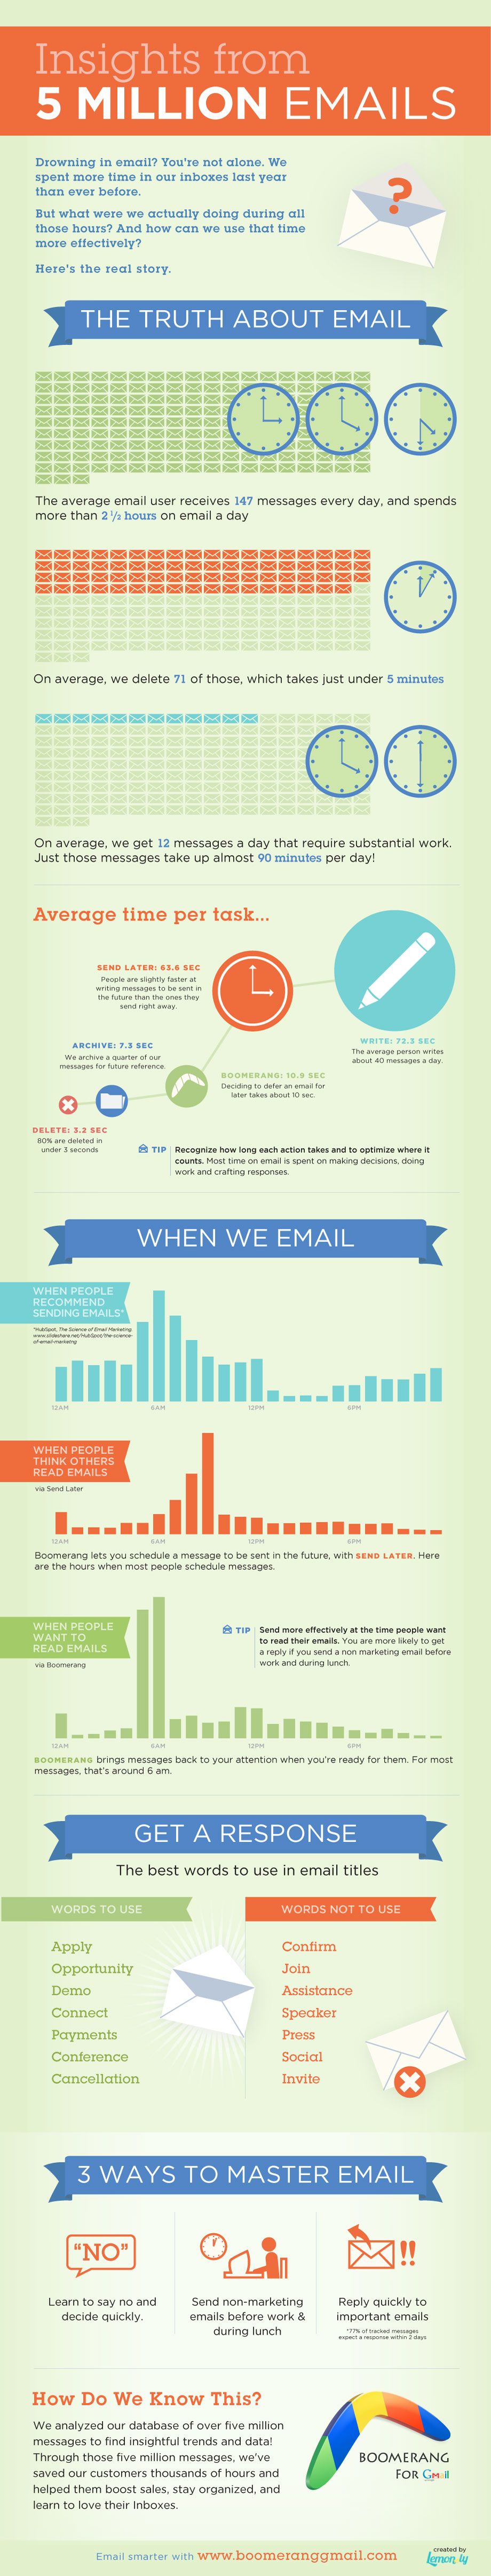 Want to Maximize Email Responses? Use These Words in Your Subject Line [INFOGRAPHIC]